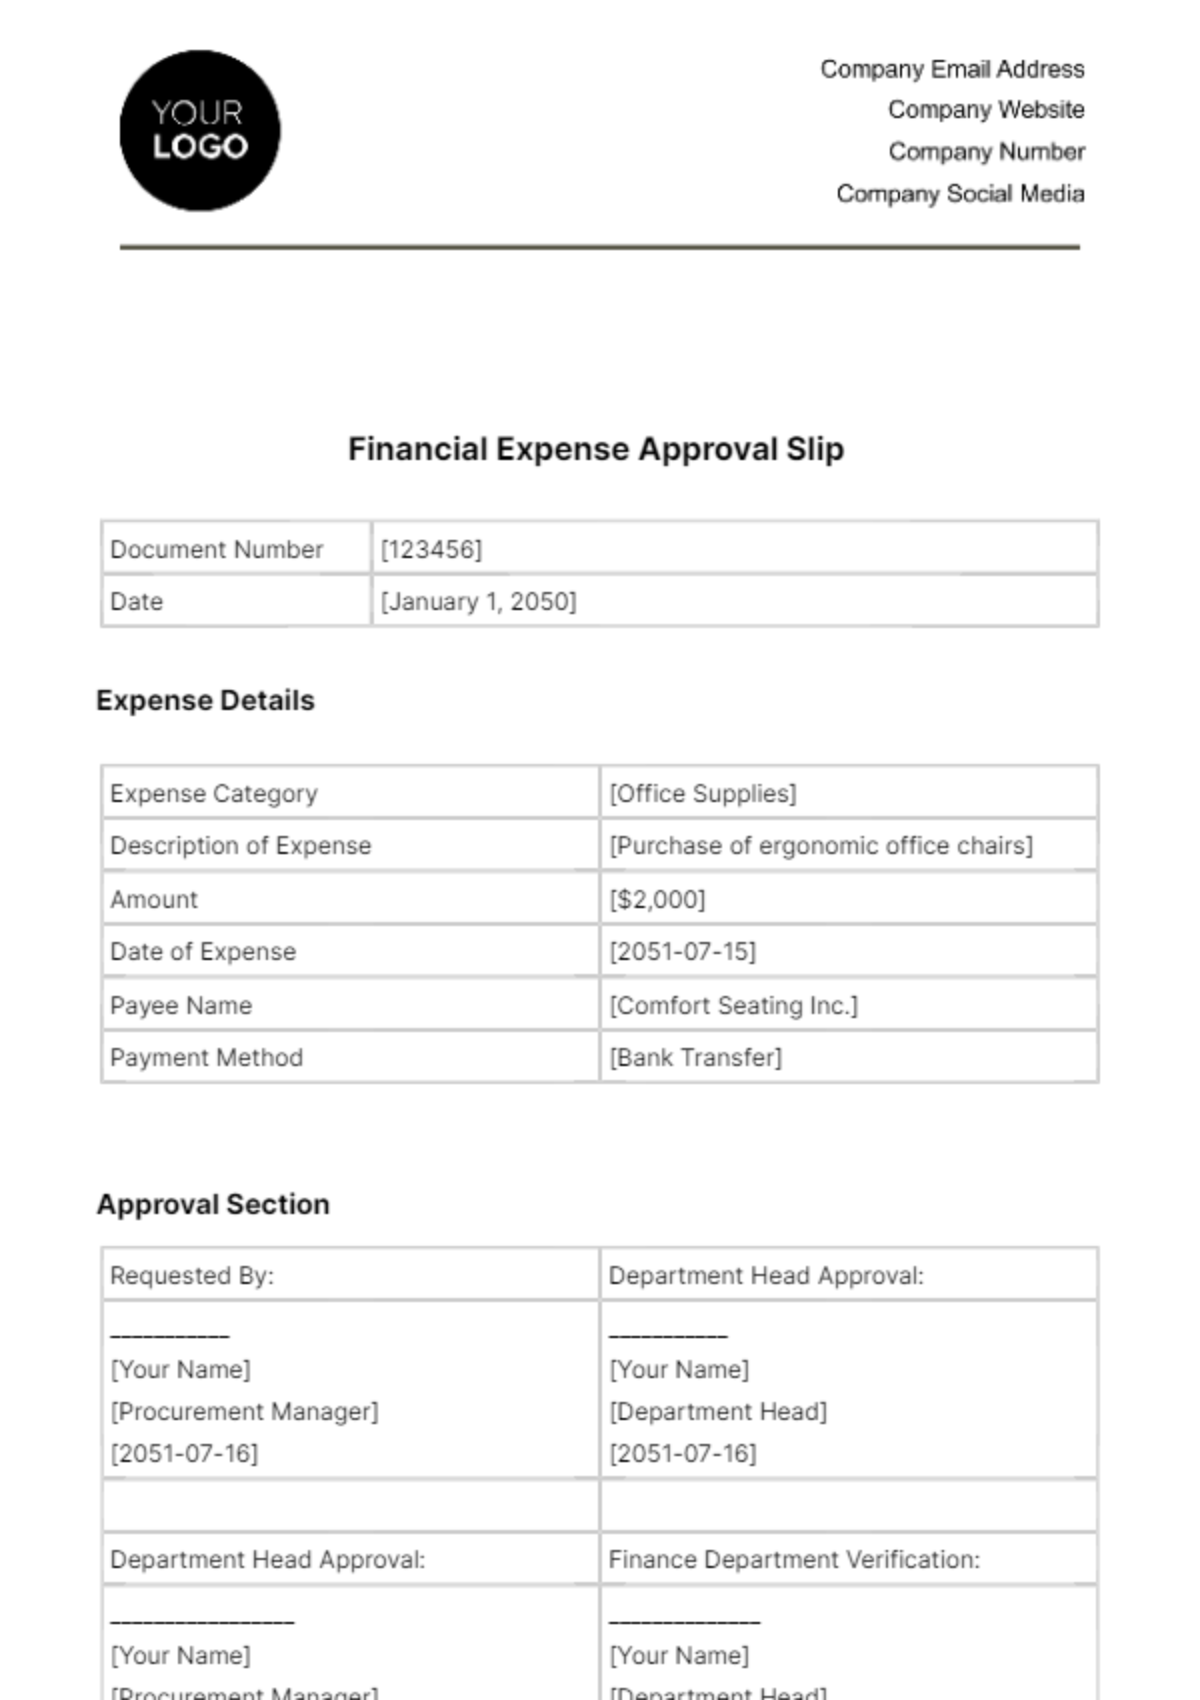 Free Financial Expense Approval Slip Template